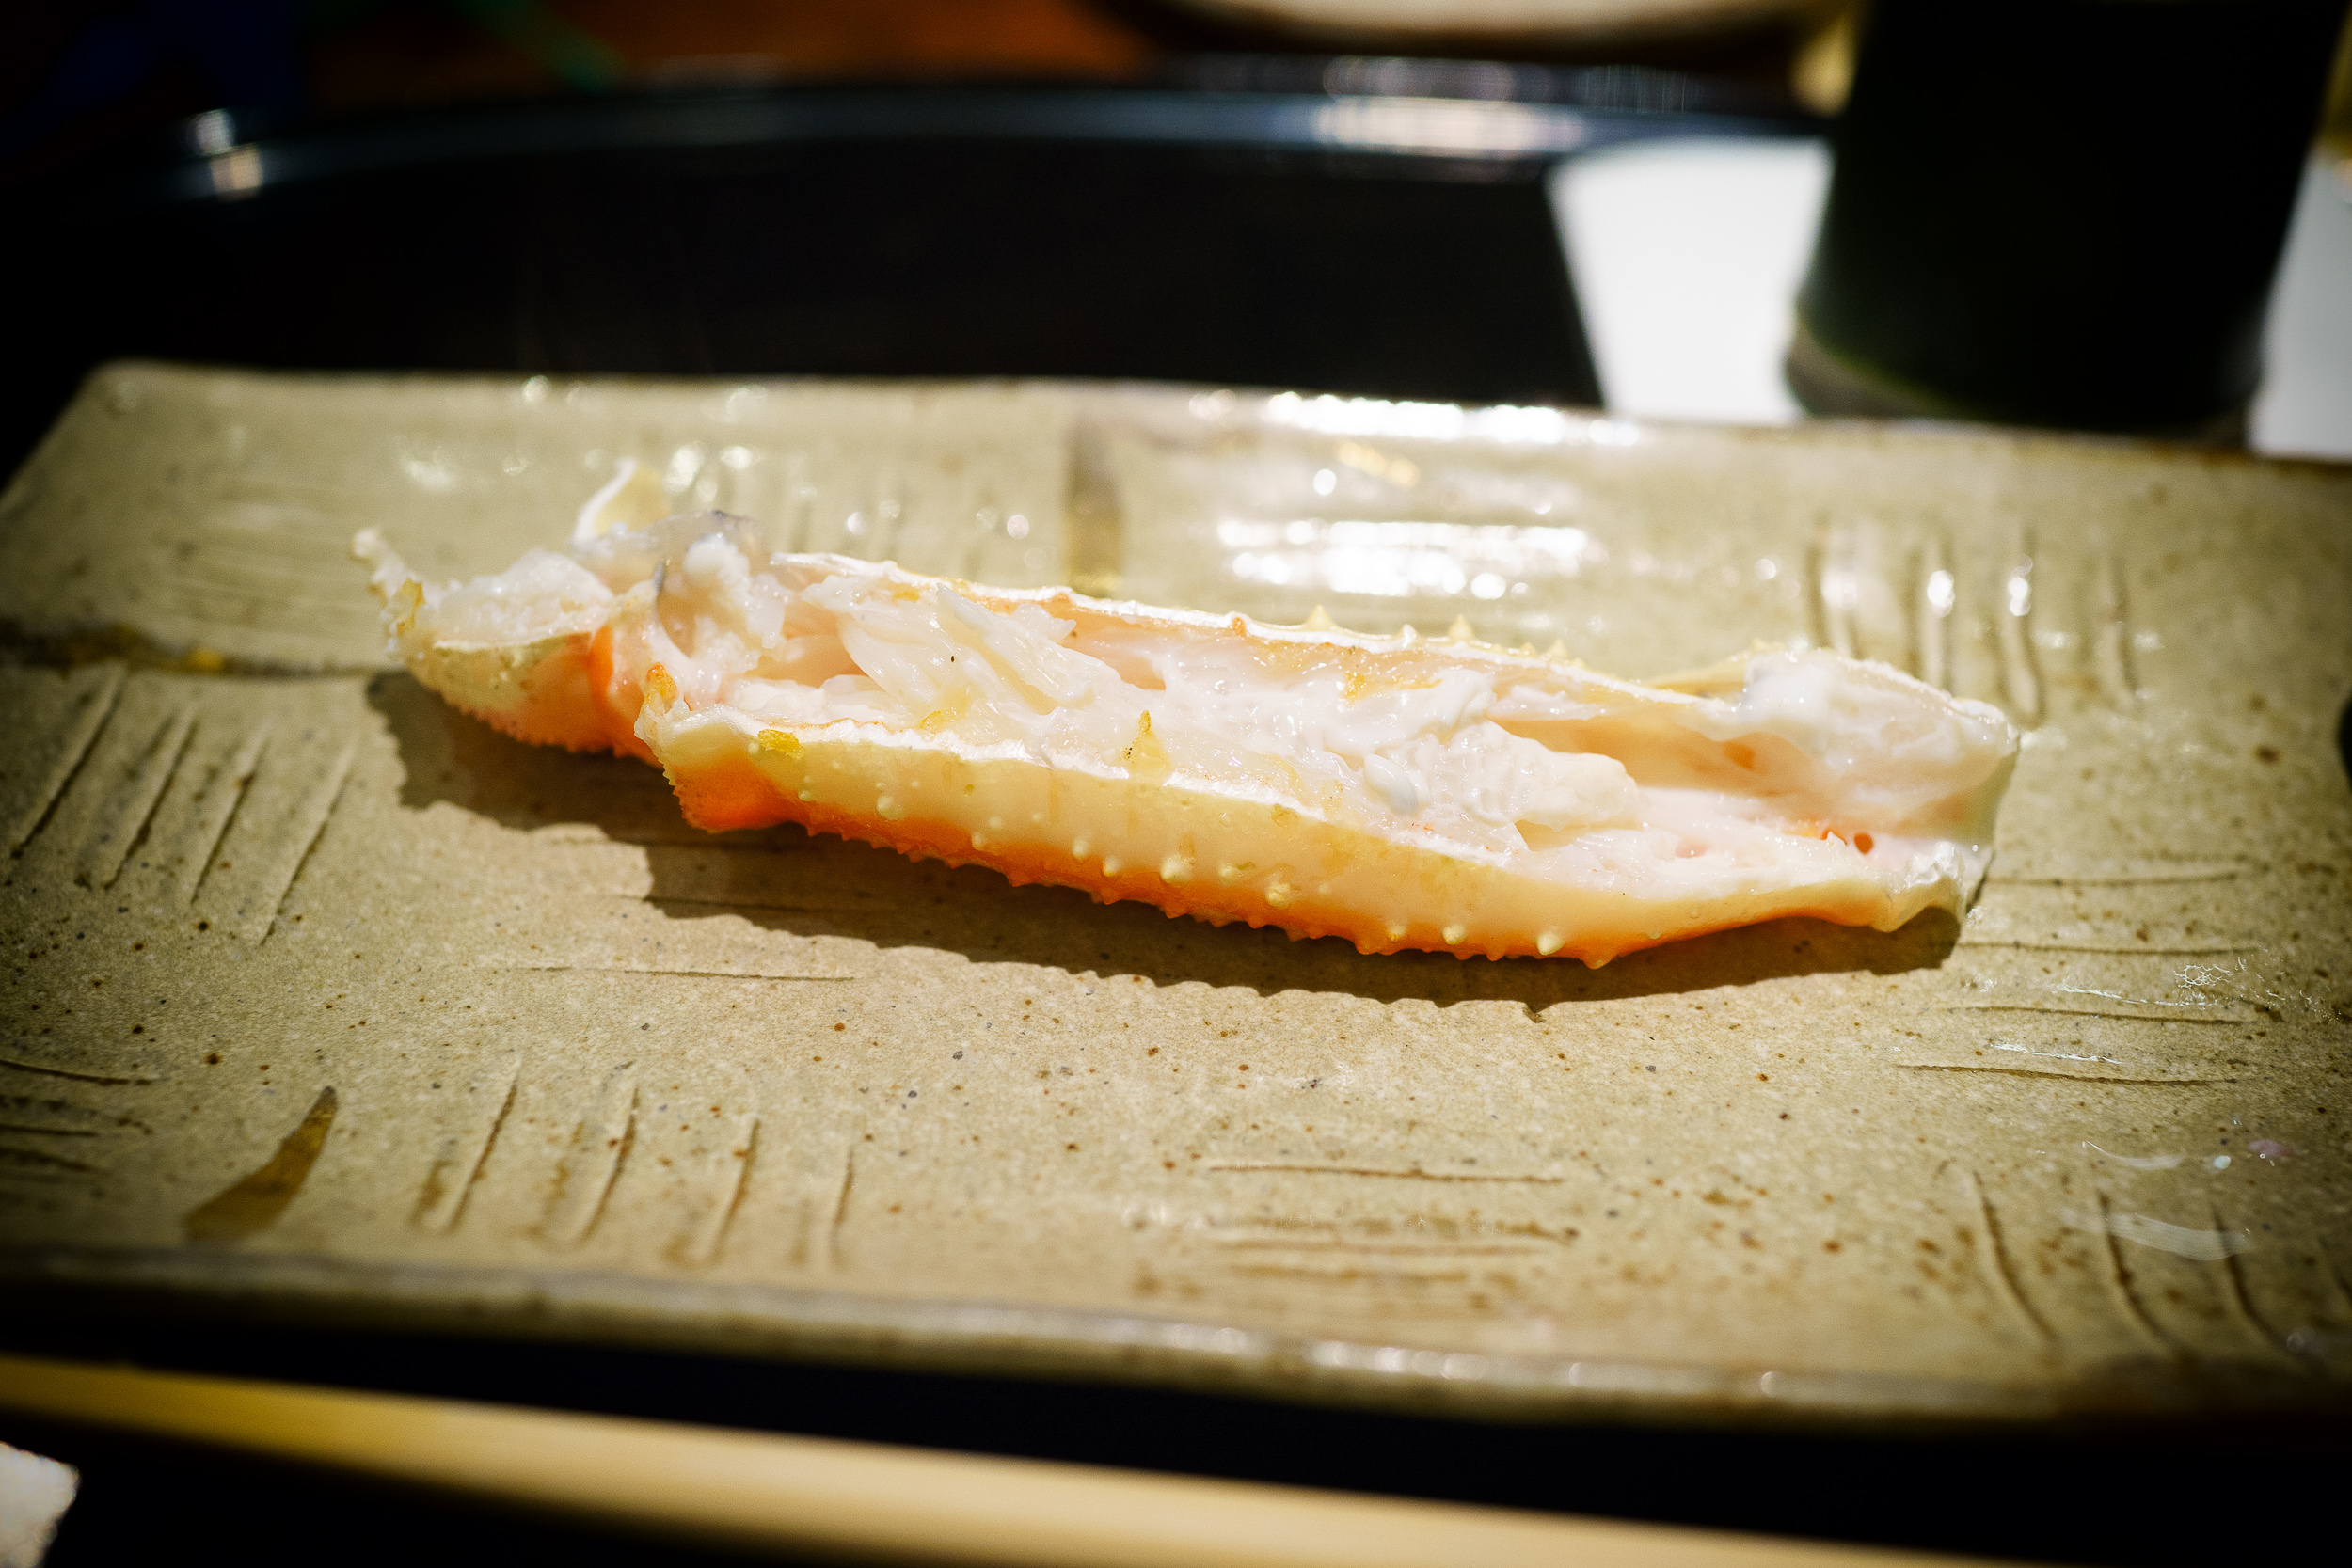 9th Course: Upper part of crab legs